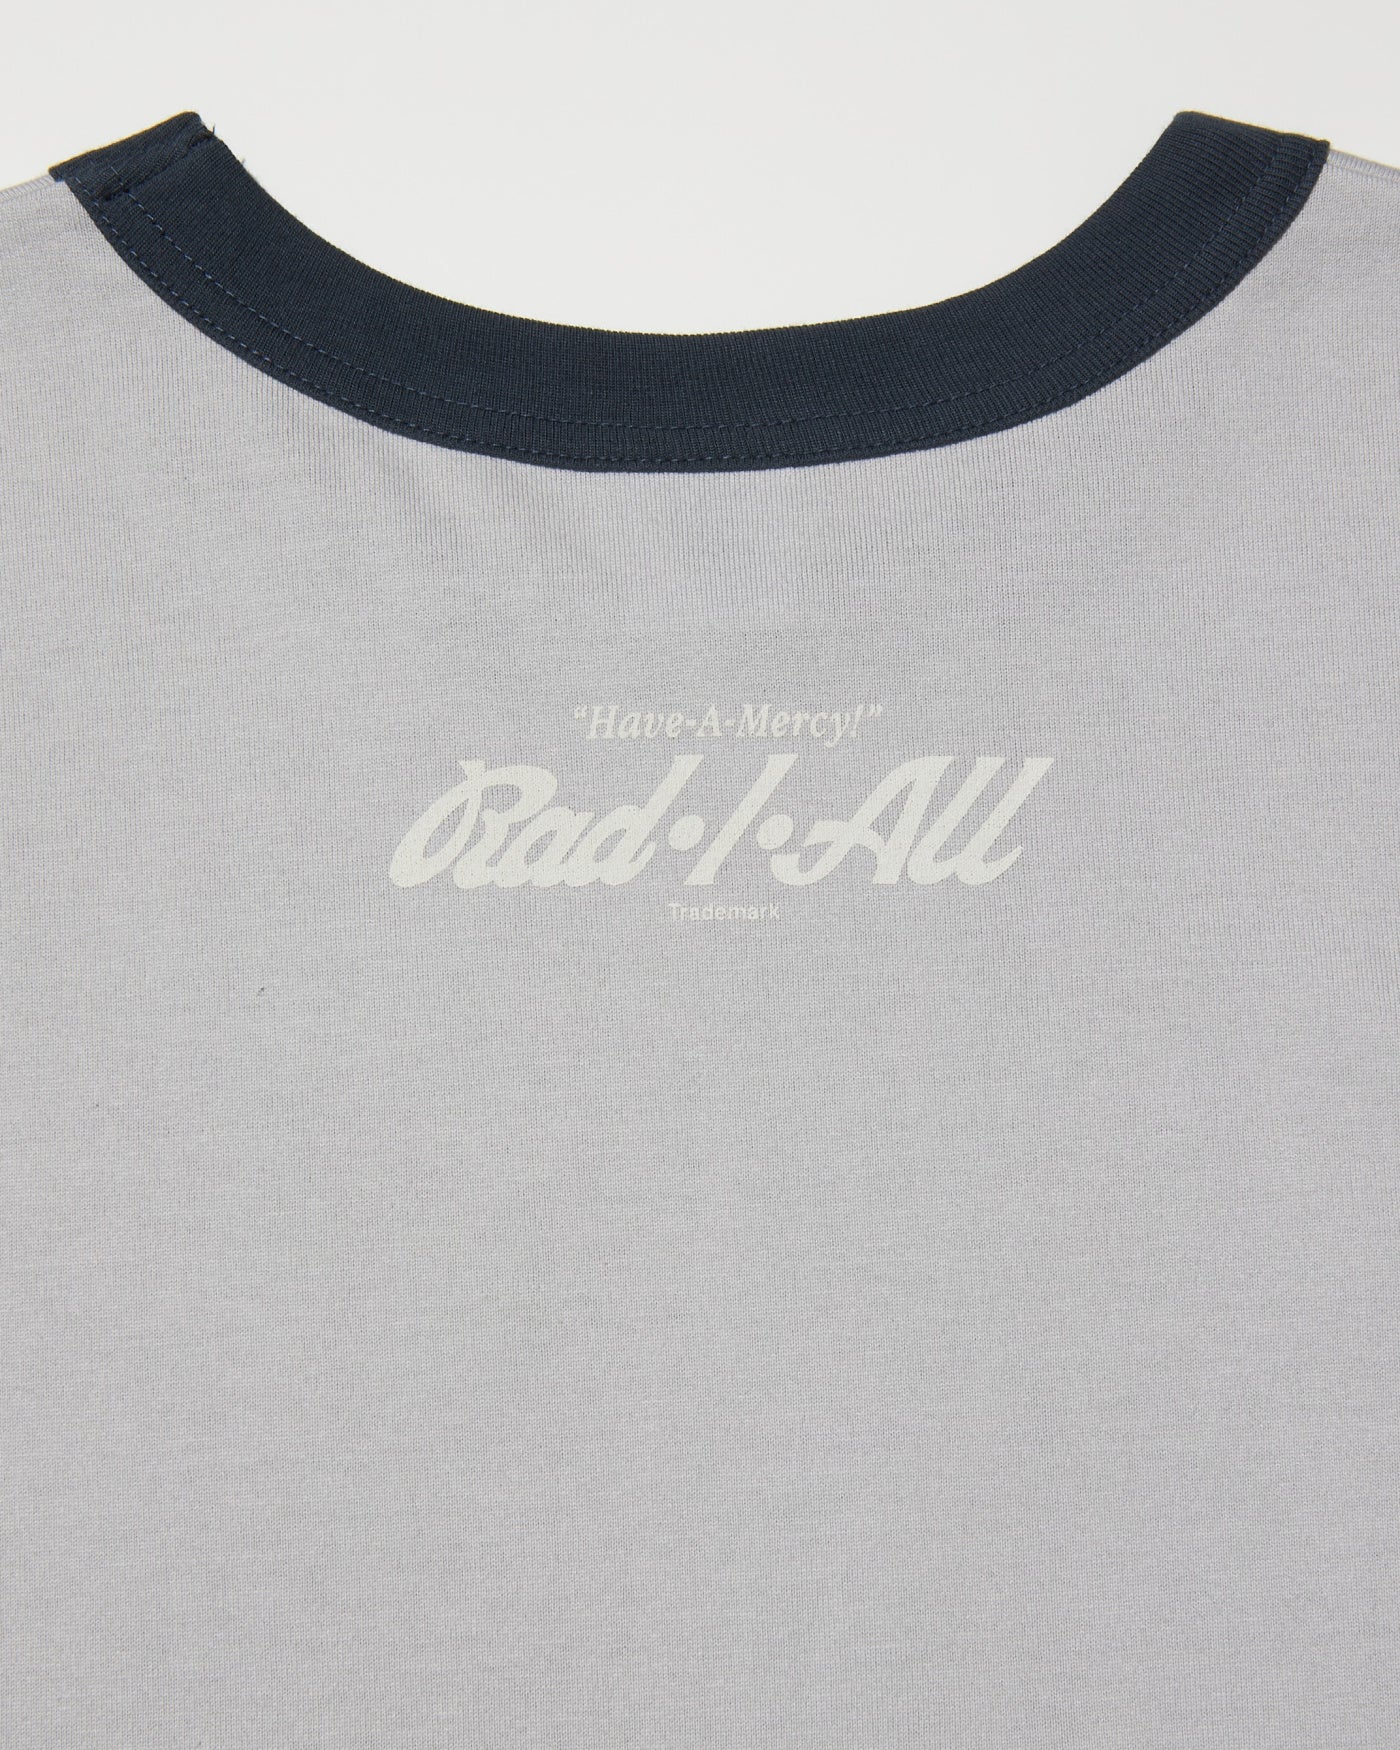 RADIALL | COOKIE - CREW NECK T-SHIRT S/S - Gray